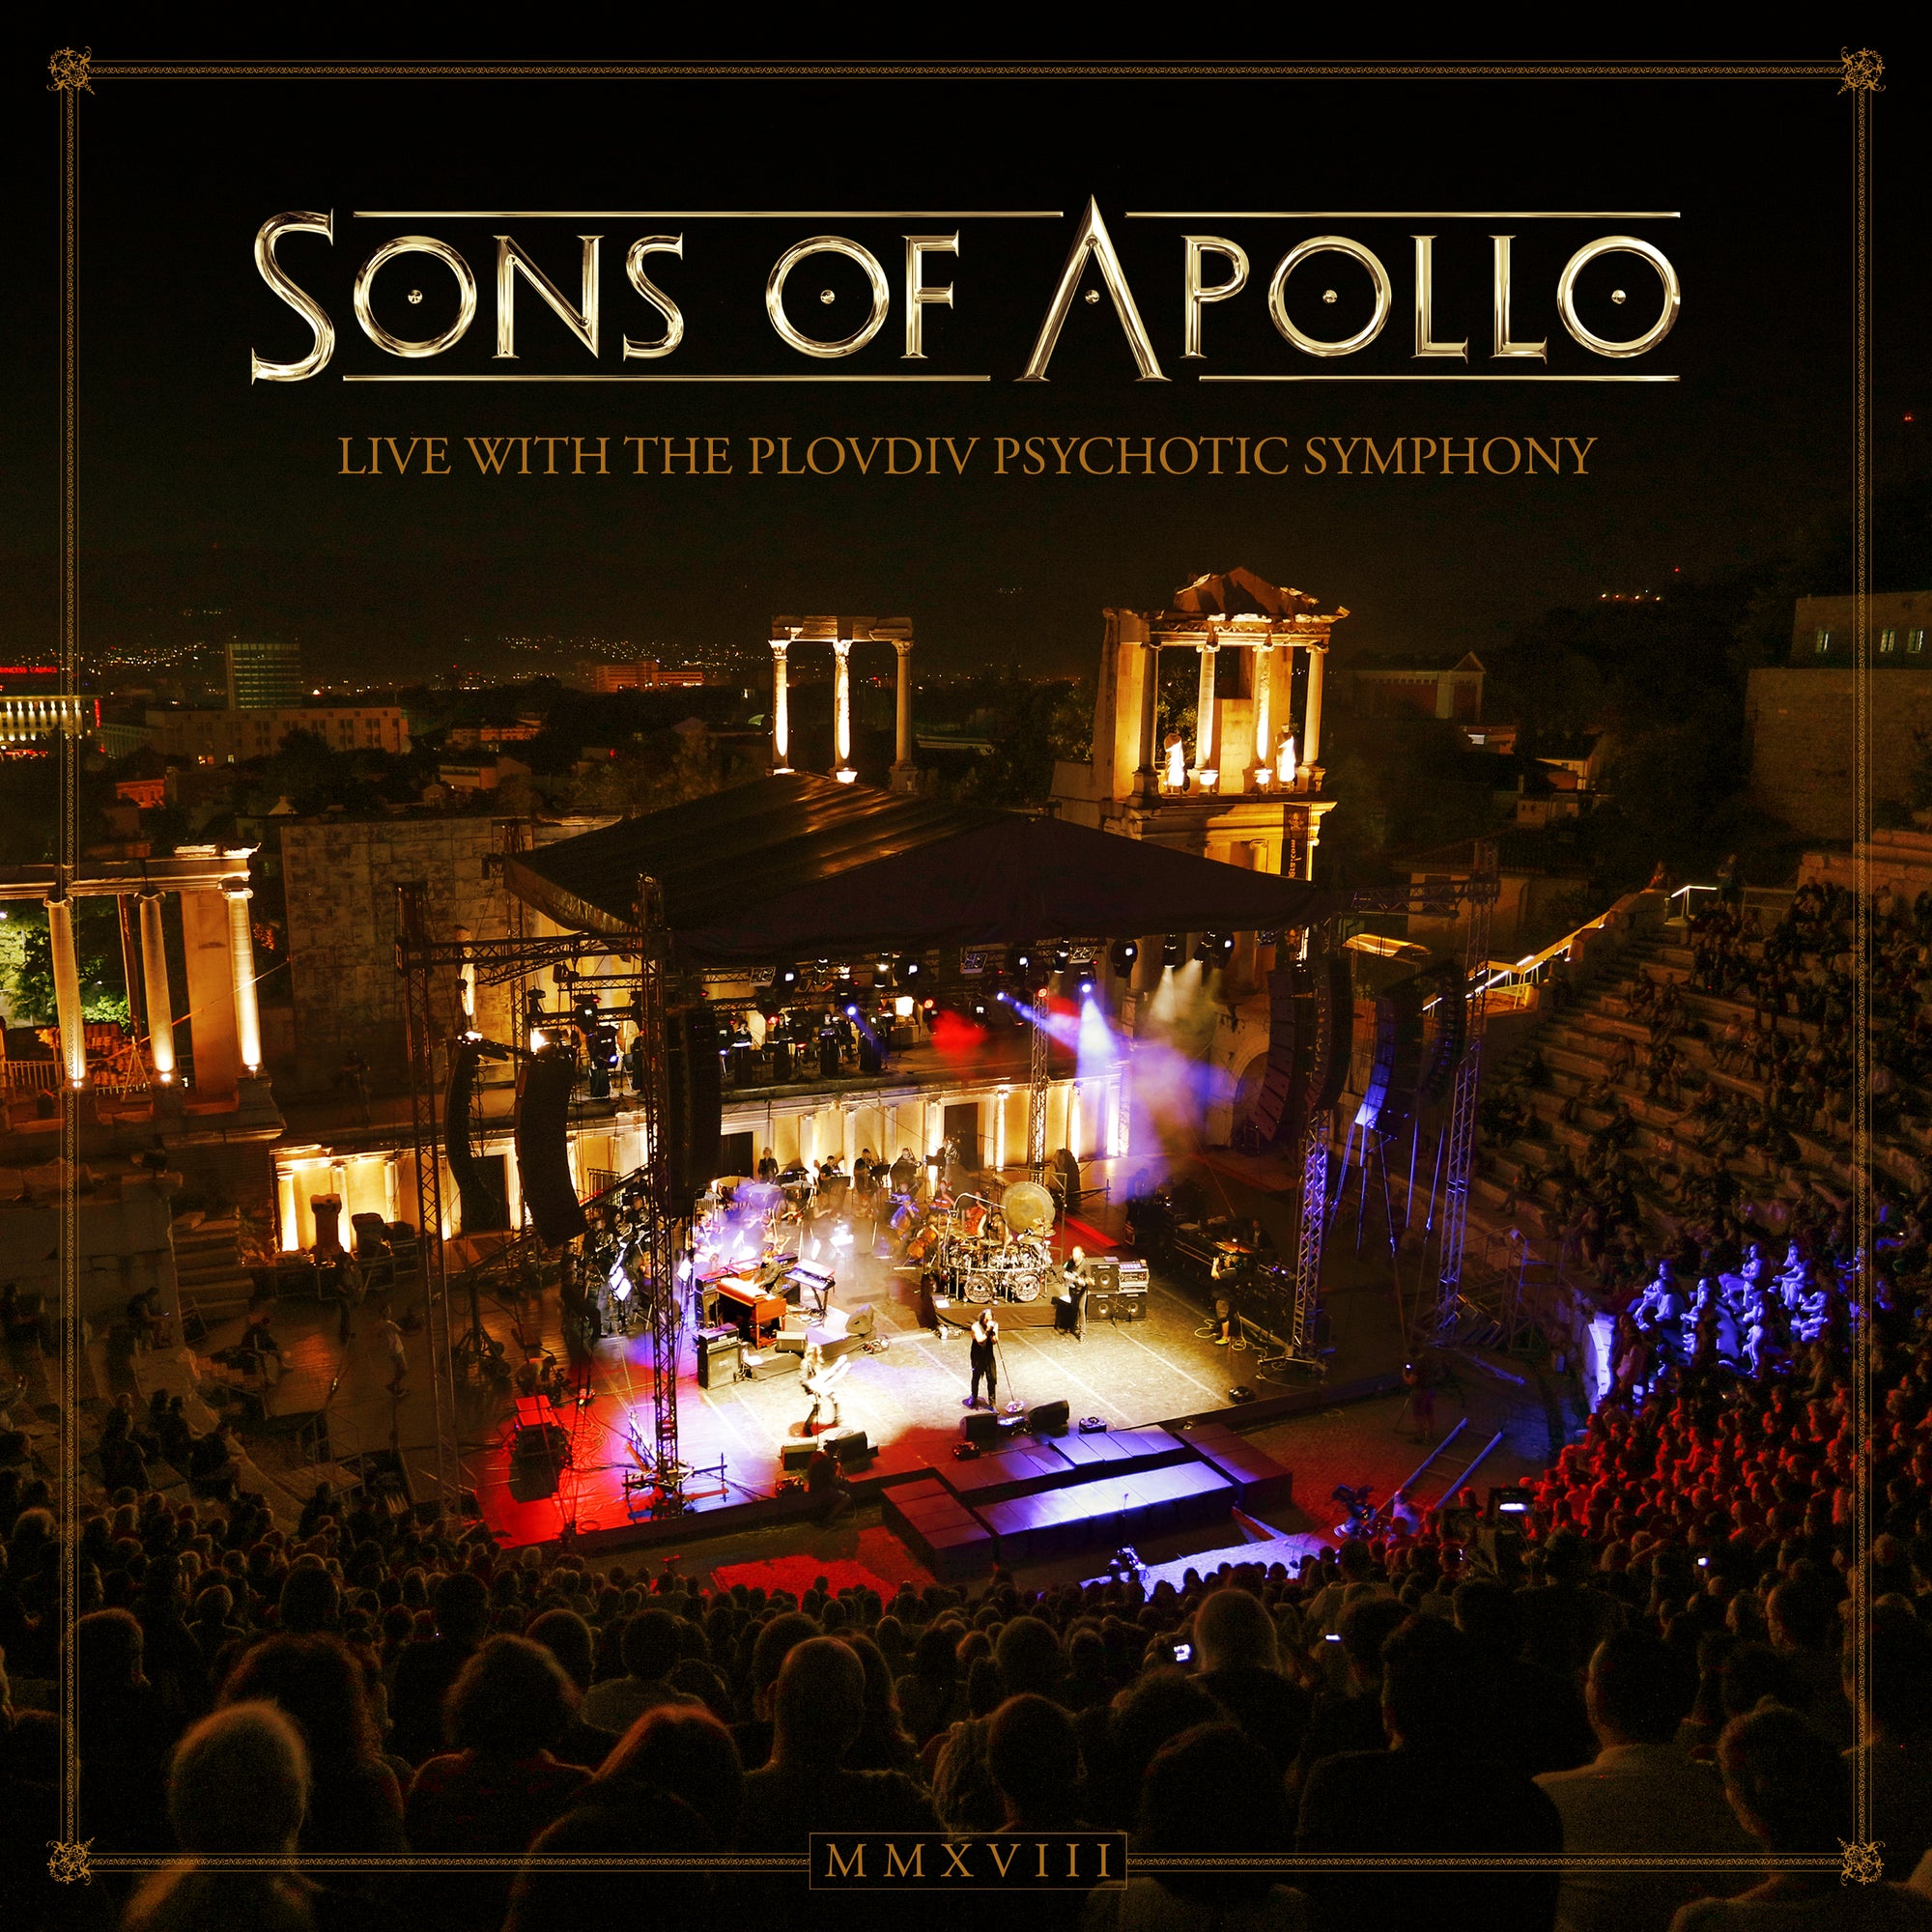 SONS OF APOLLO // LIVE WITH THE PLOVDIV PSYCHOTIC SYMPHONY (LTD DELUXE 3CD+DVD DIGIPAK IN SLIPCASE)